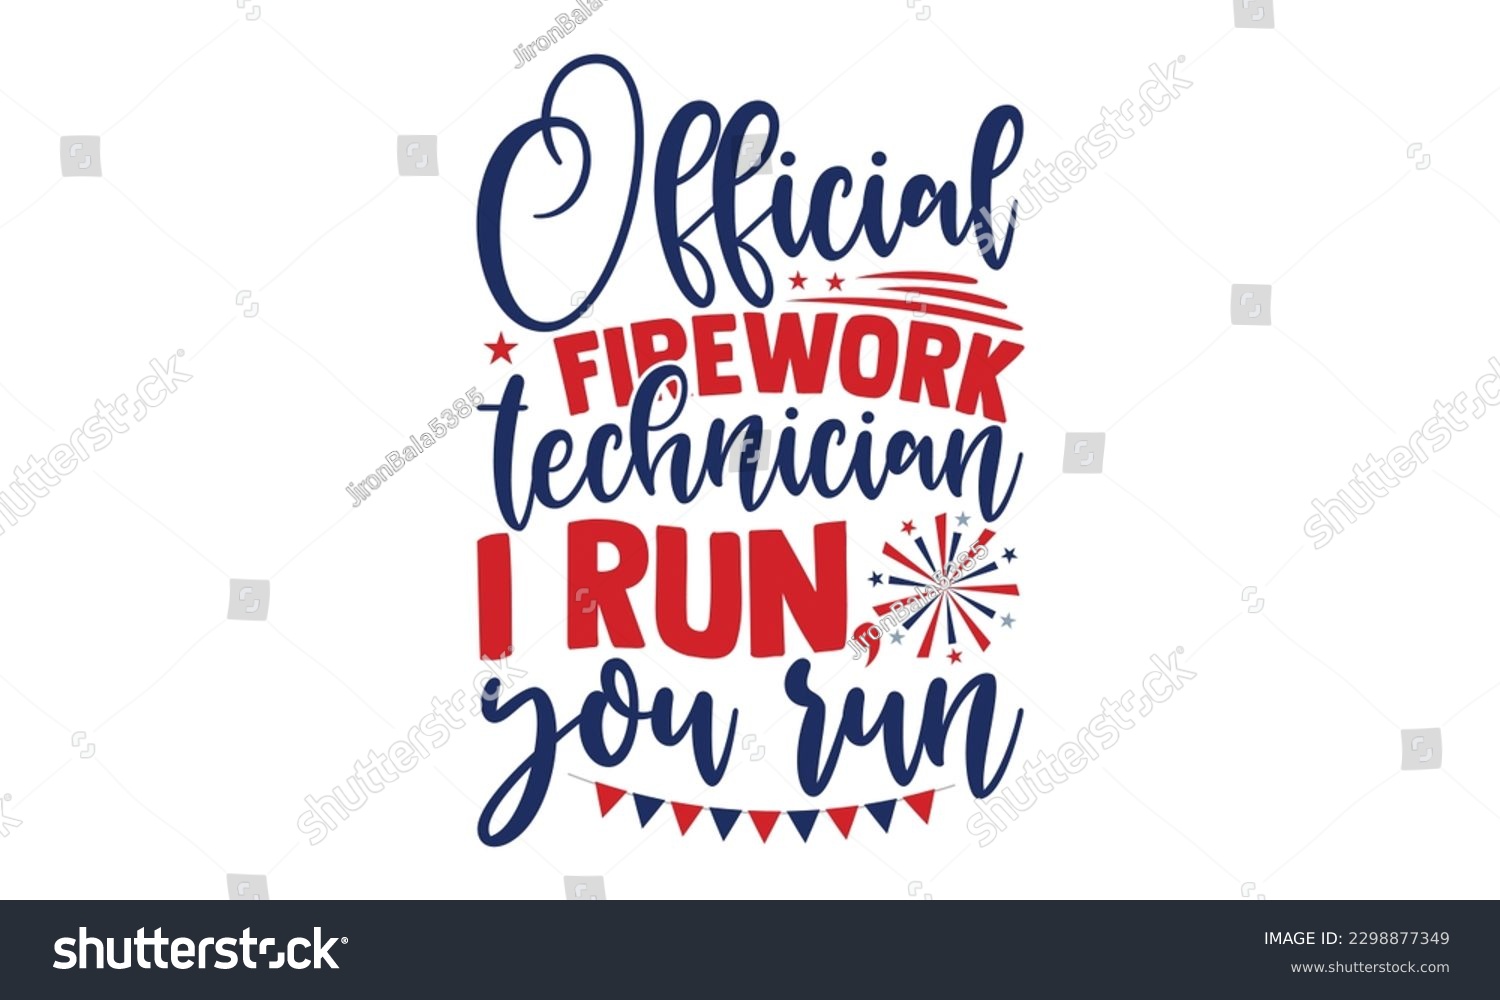 SVG of Official Firework Technician I Run, You Run - 4th of July SVG Design, Hand drawn lettering phrase, Illustration for prints on t-shirts, bags, posters and cards, for Cutting Machine, Silhouette Cameo,  svg